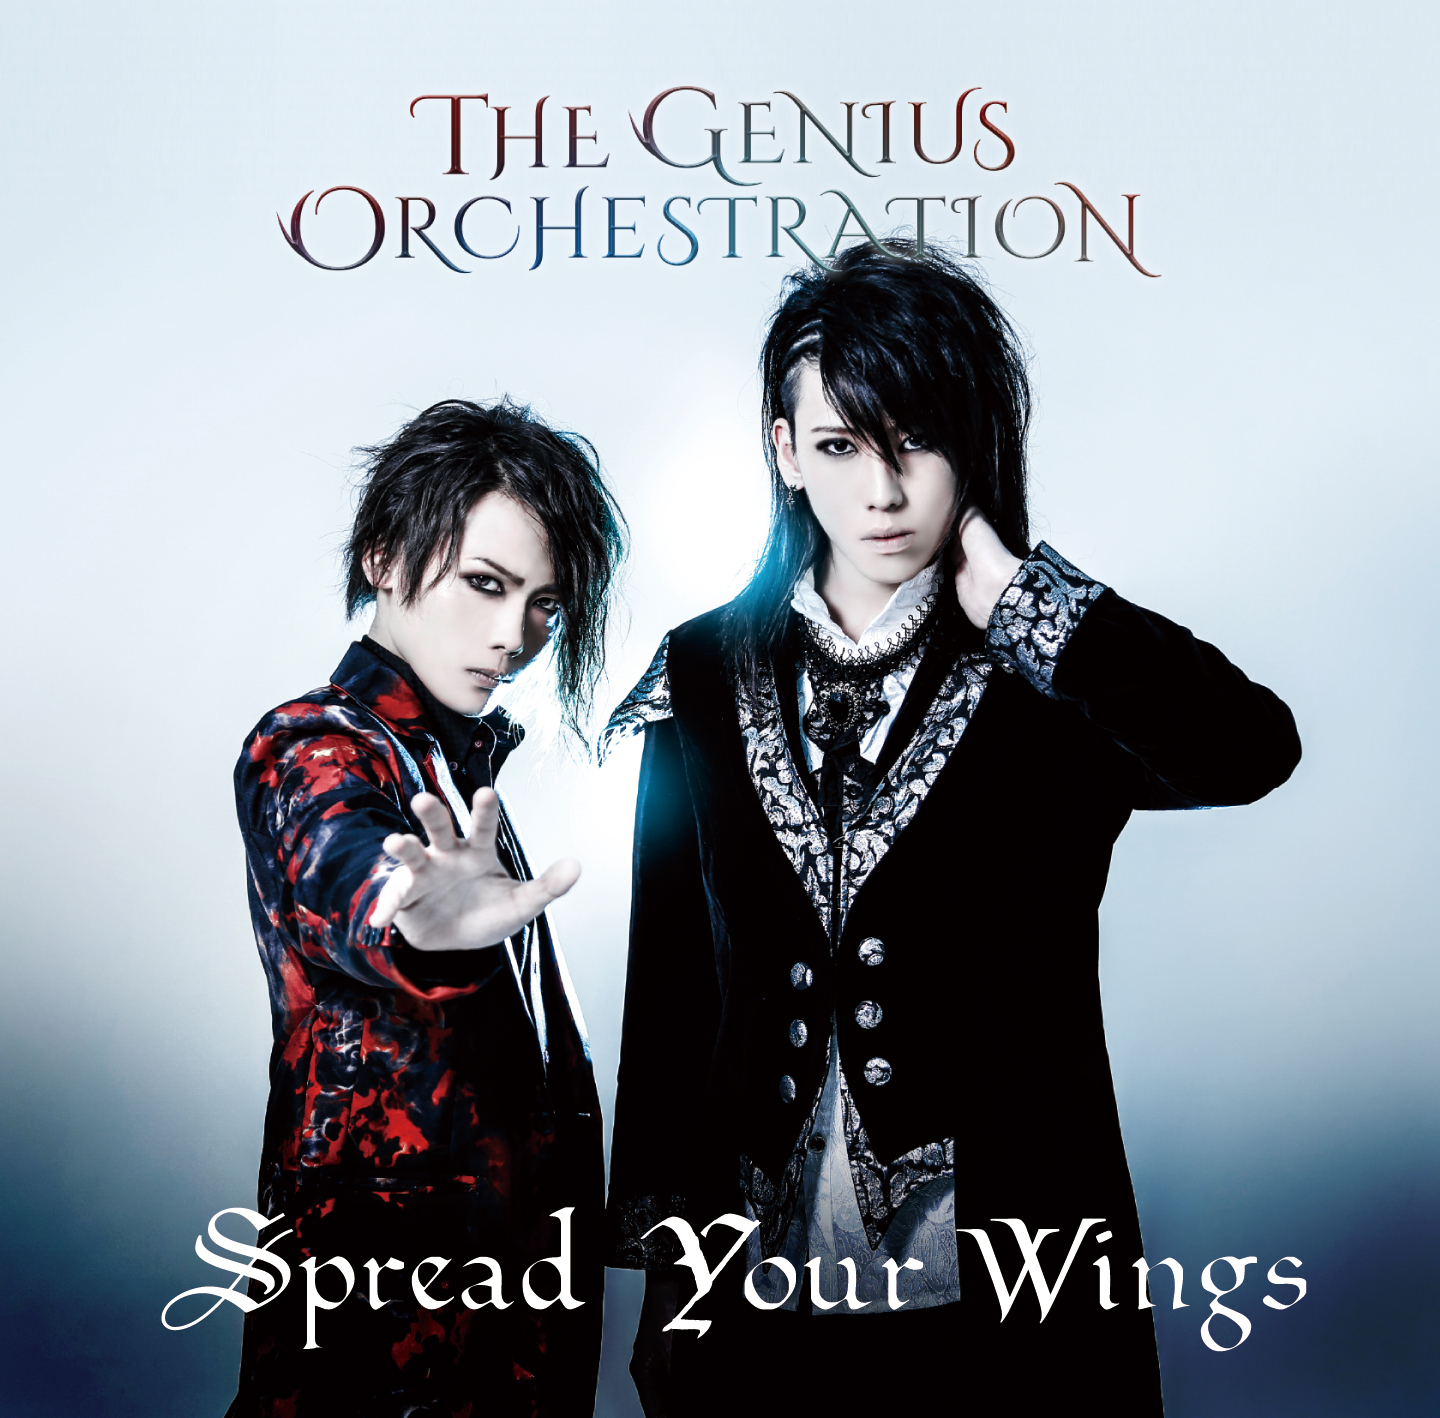 THE GENIUS ORCHESTRATION ｢Spread Your Wings｣本日リリース !!